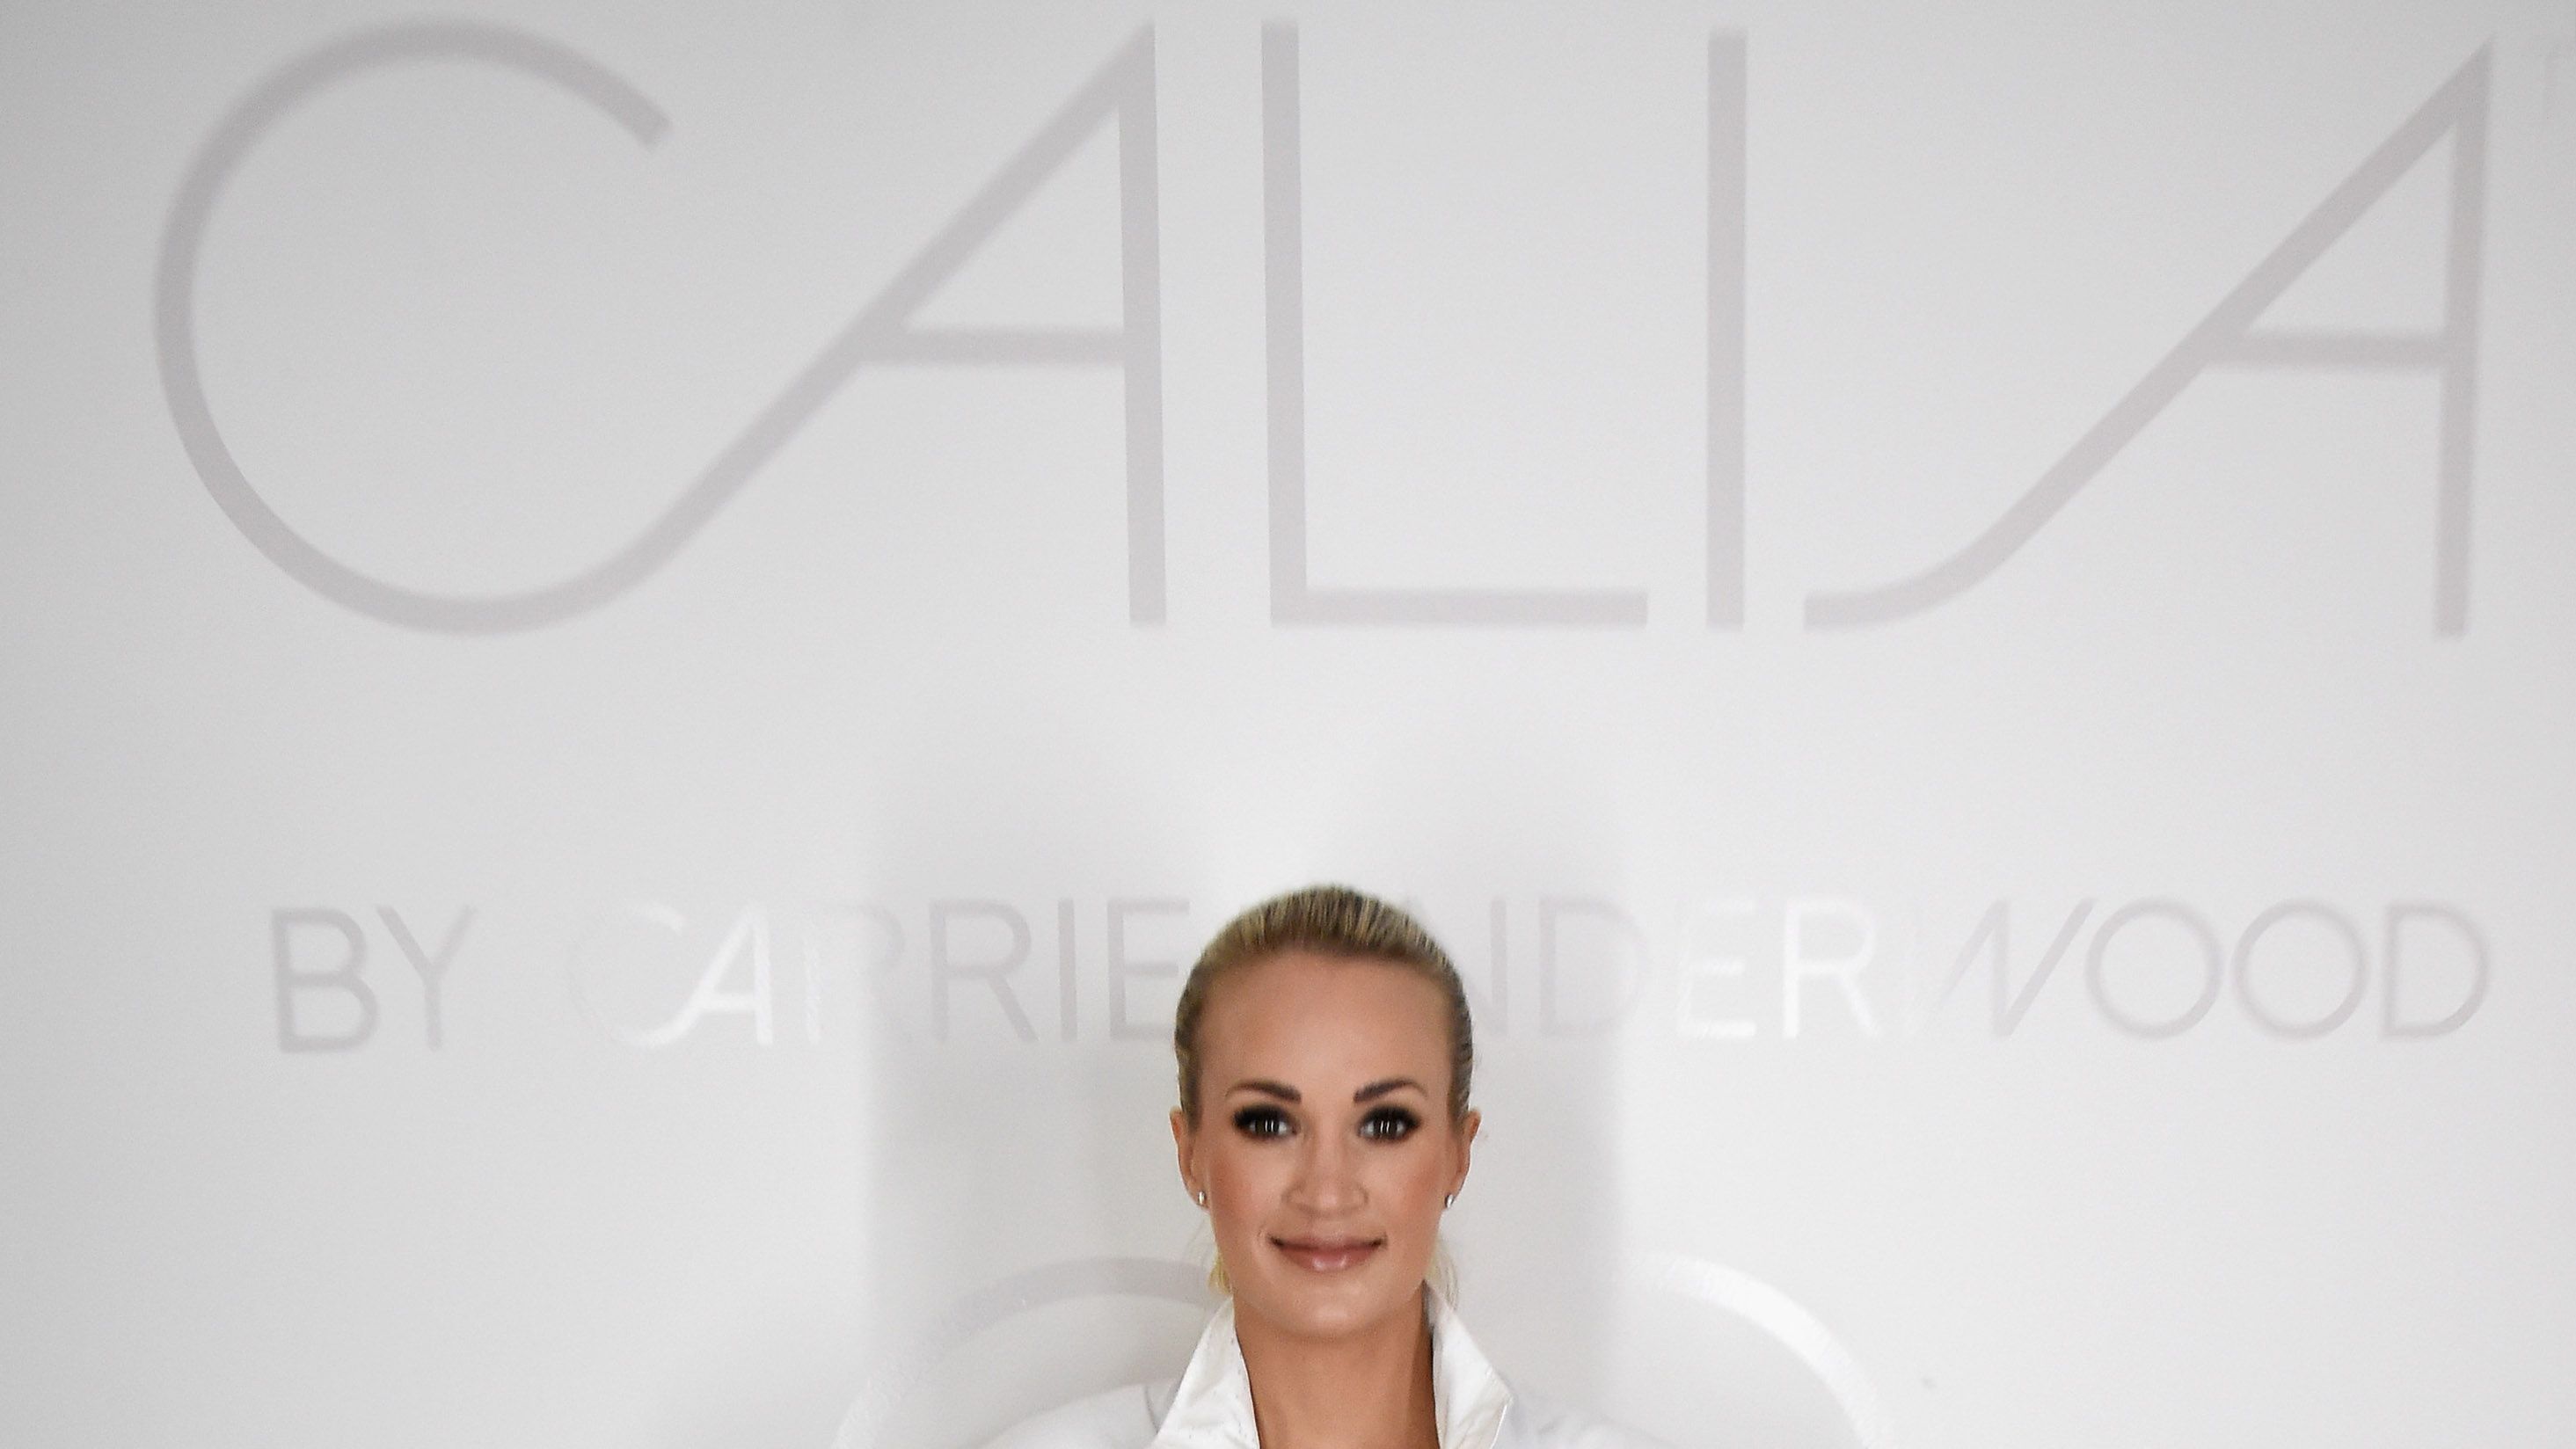 Carrie Underwood Releases Her Fitness Line, Calia